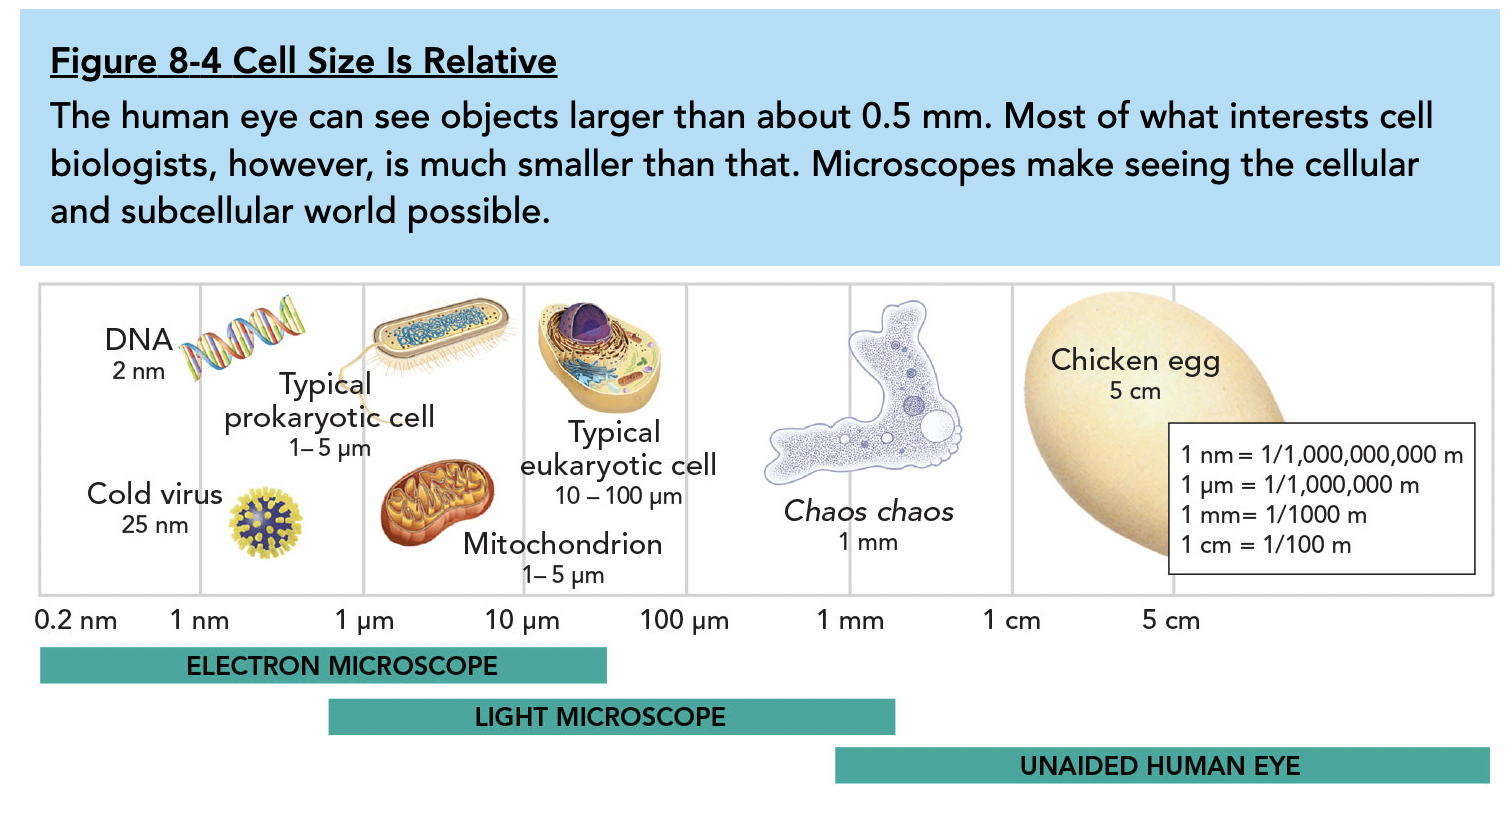 Certain units of measurement are used for tiny objects, such as cells